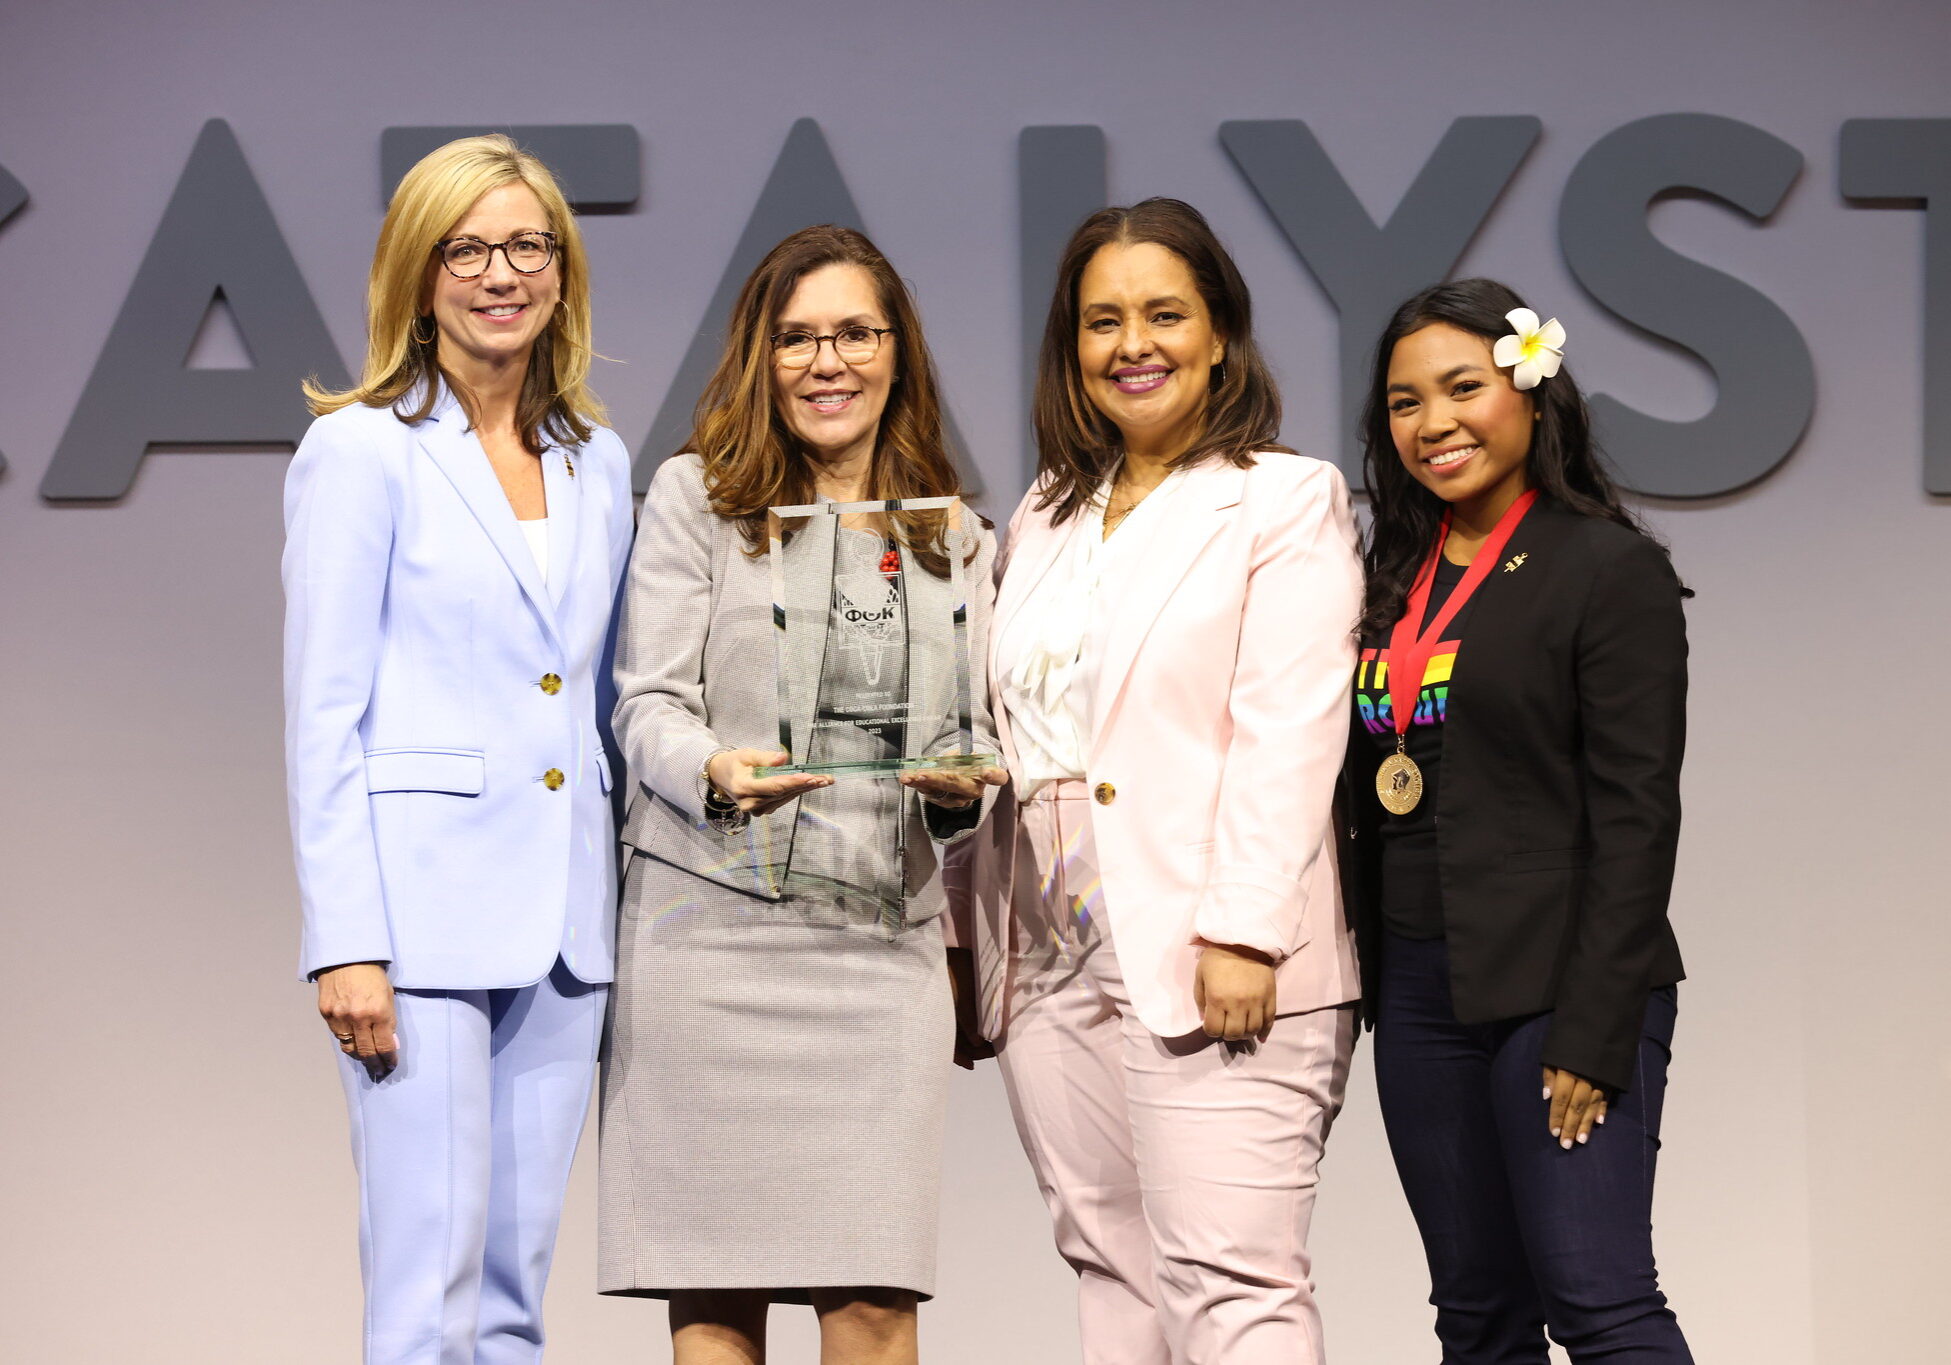 Coca-Cola’s Vice President of Community and Stakeholder Relations <b>Alba Baylin</b> accepts the Alliance for Educational Excellence Award on behalf of the Coca-Cola Foundation during PTK Catalyst 2023 in Columbus, Ohio. Also pictured, Phi Theta Kappa Foundation’s Executive Director <b>Dr. Monica Marlowe</b>, Chief Opportunity Officer <b>Dr. Nancy Sanchez</b>, and 2022-23 International Co-President <b>Keziah Ancheta</b>.